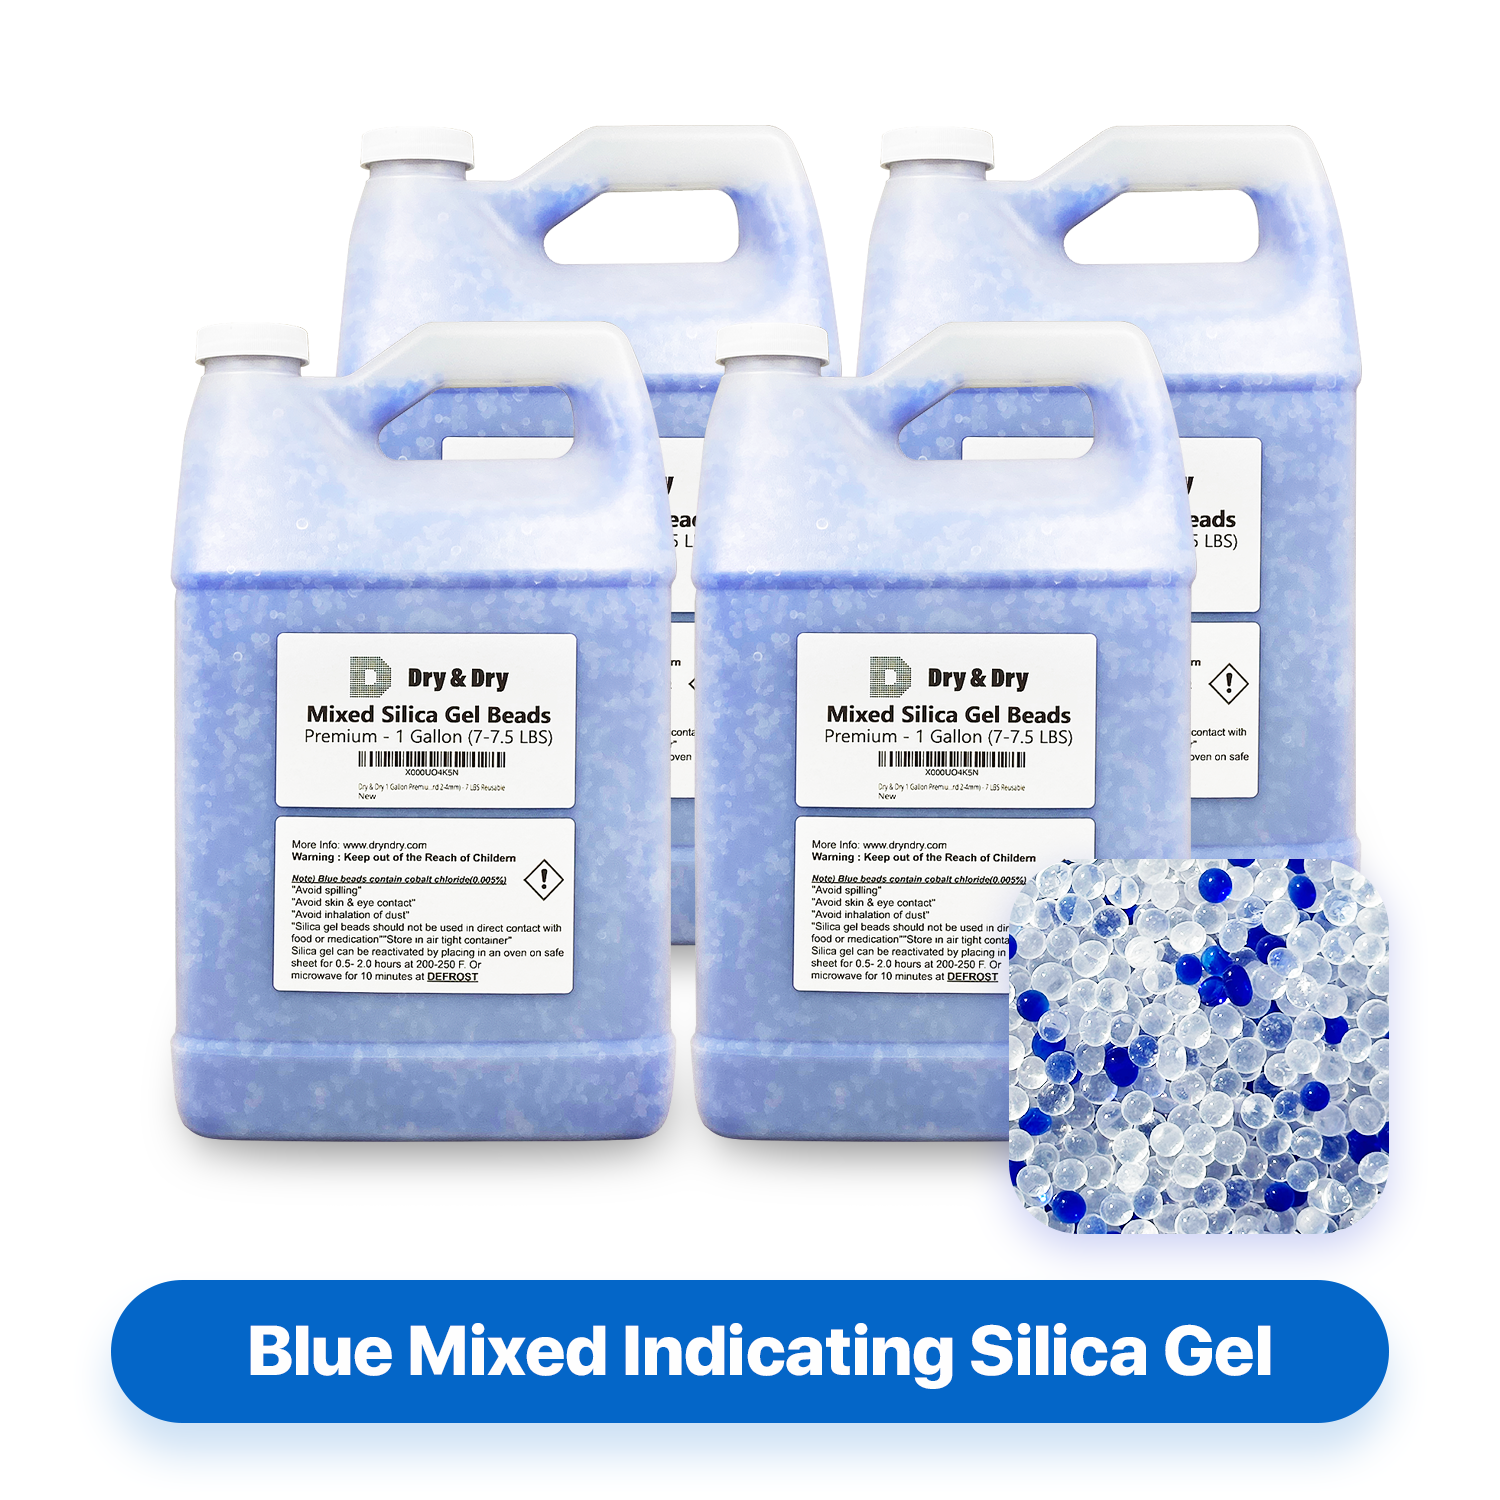 4 Gallon (28-30 LBS) "Dry & Dry" High Quality White & Blue Mixed Silica Gel Desiccant Beads - Rechargeable Beads